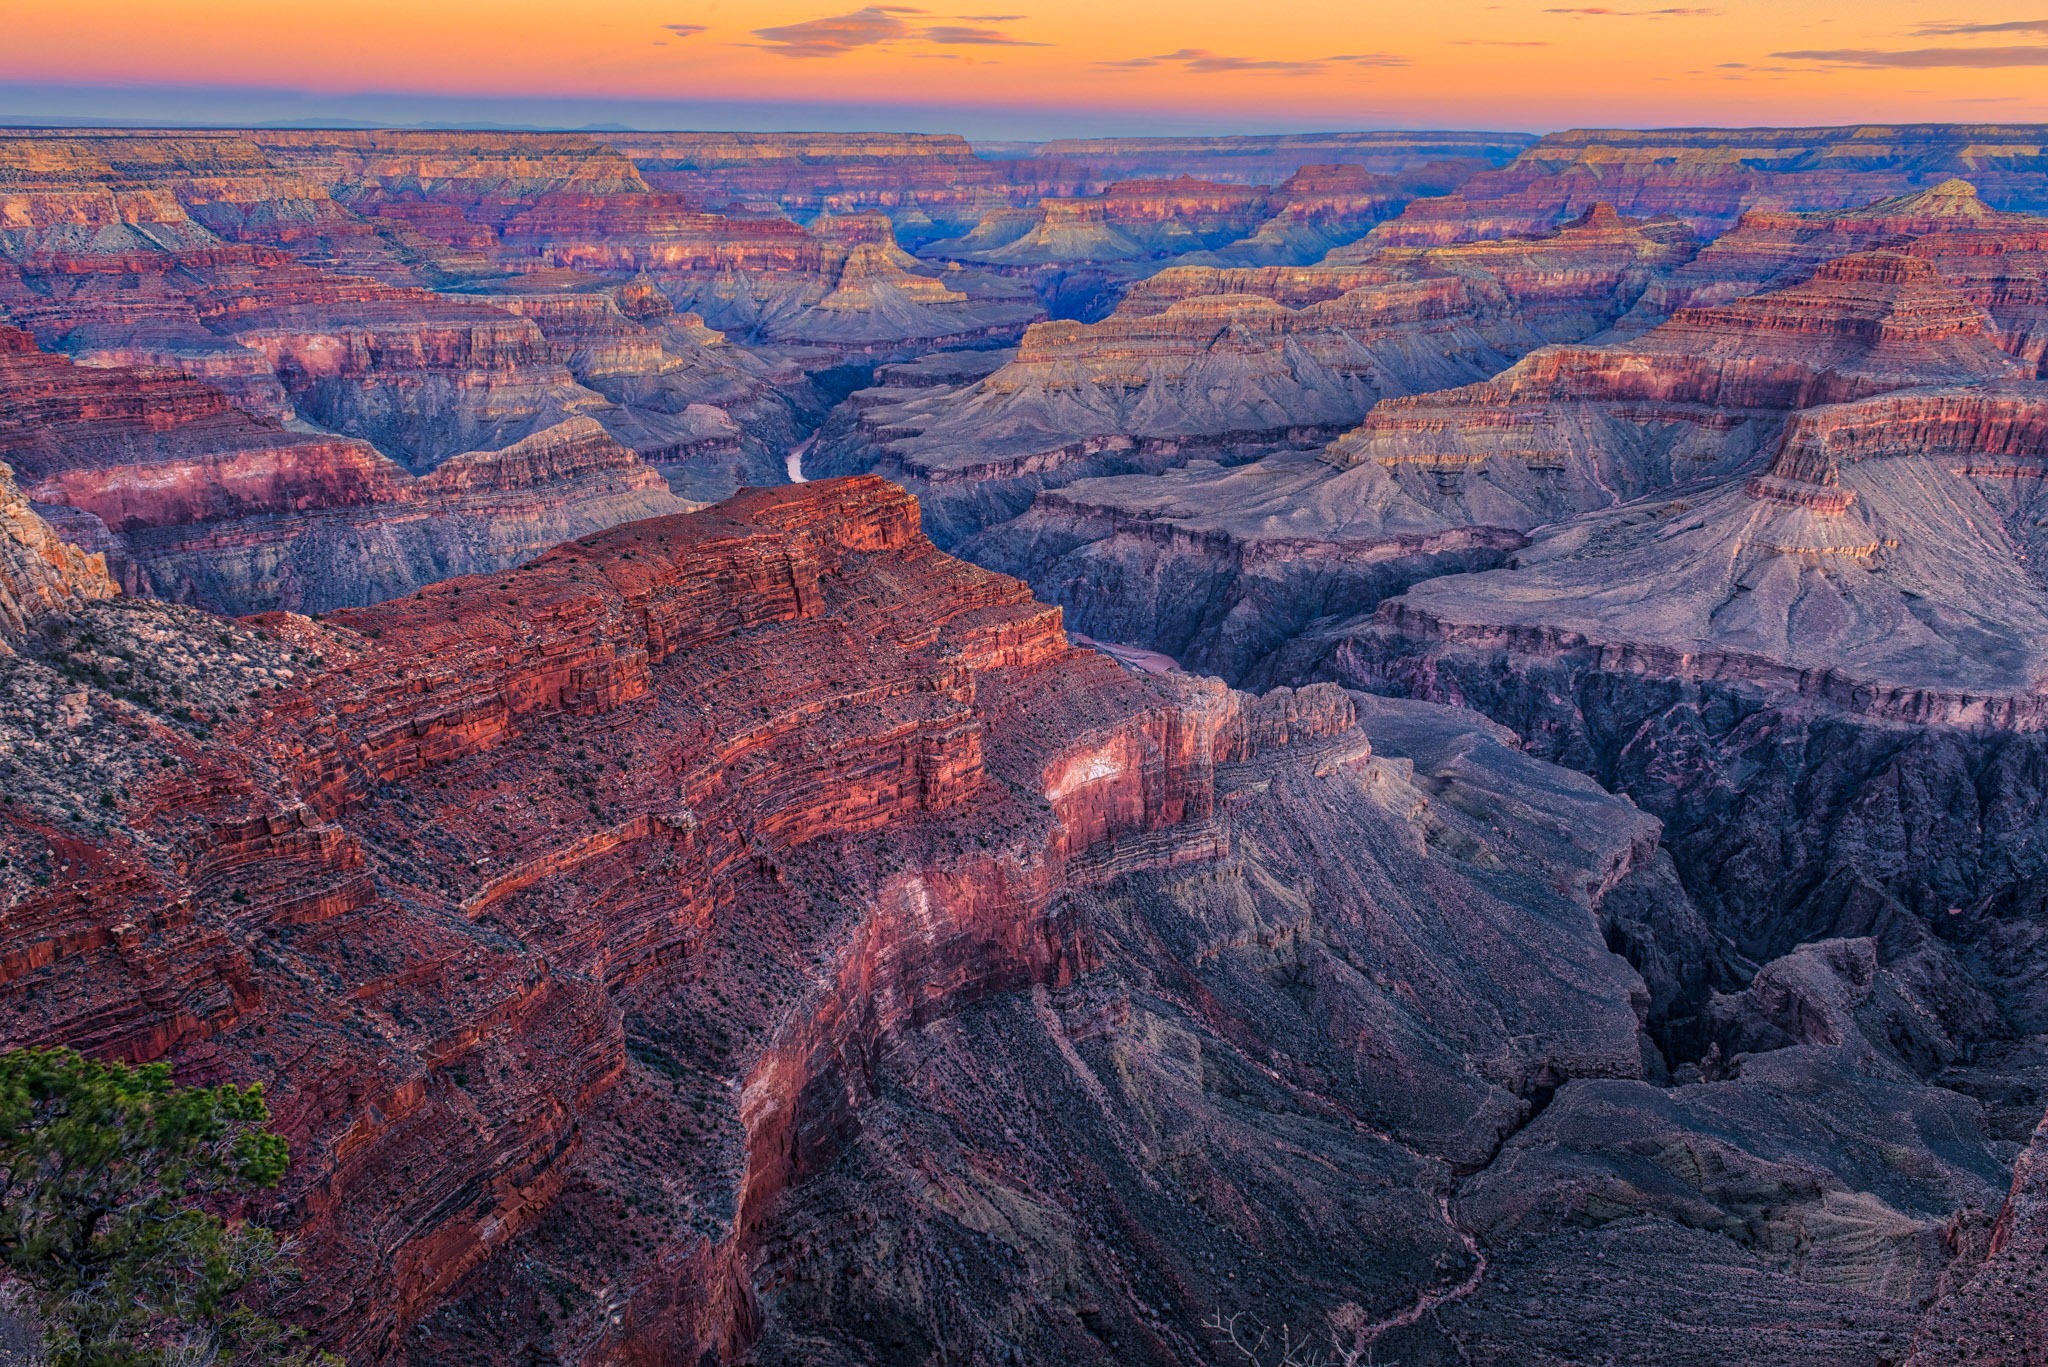 Sunrise at Hopi Point on the South Rim of the Grand Canyon in Arizona.